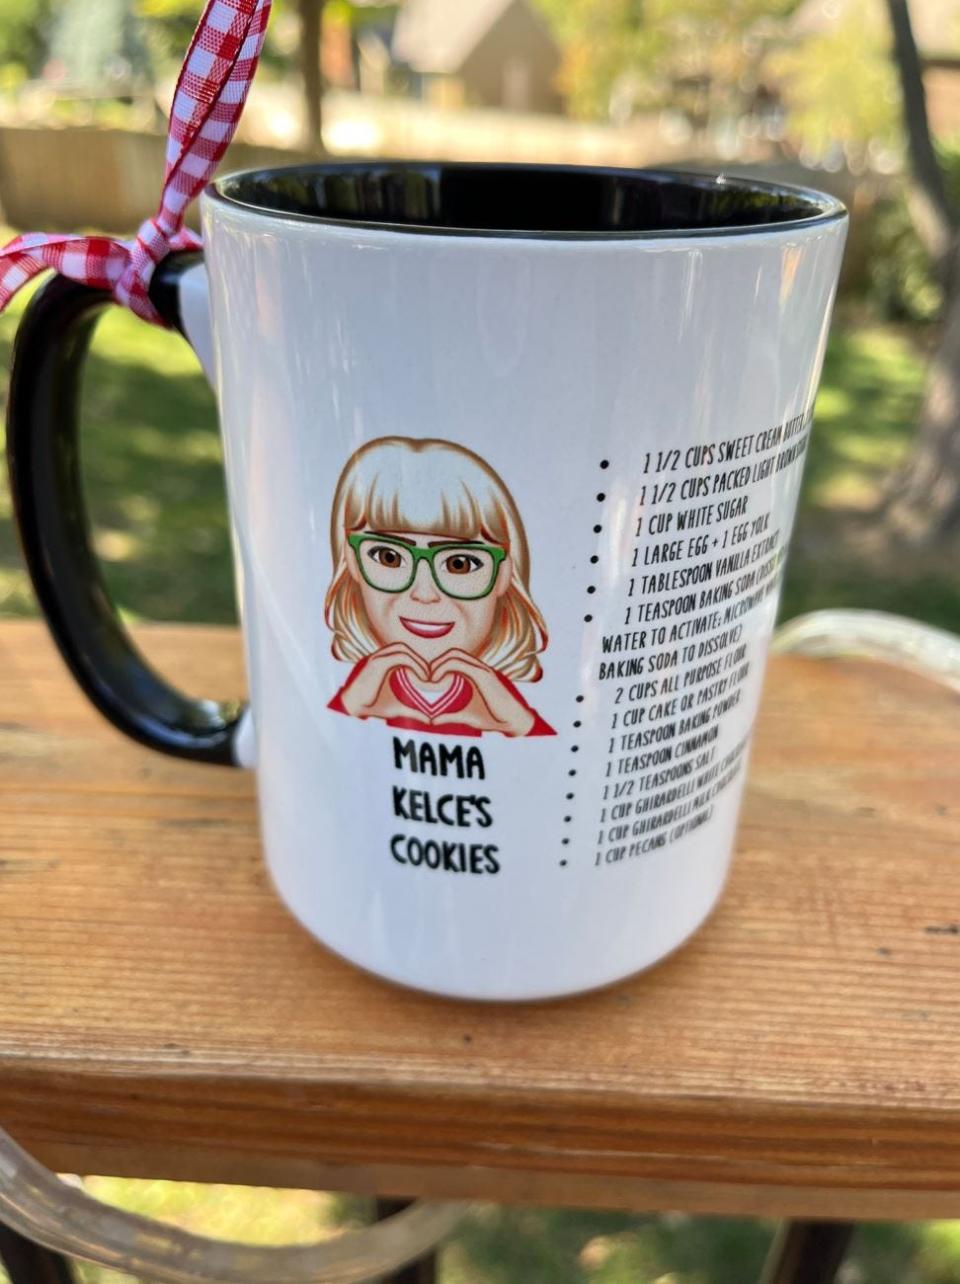 Annie Stowe doesn't have any immediate plans to release a new batch of "Mama Kelce's" Cookies Mug. She is currently working on fulfilling a 2,000-mug order.